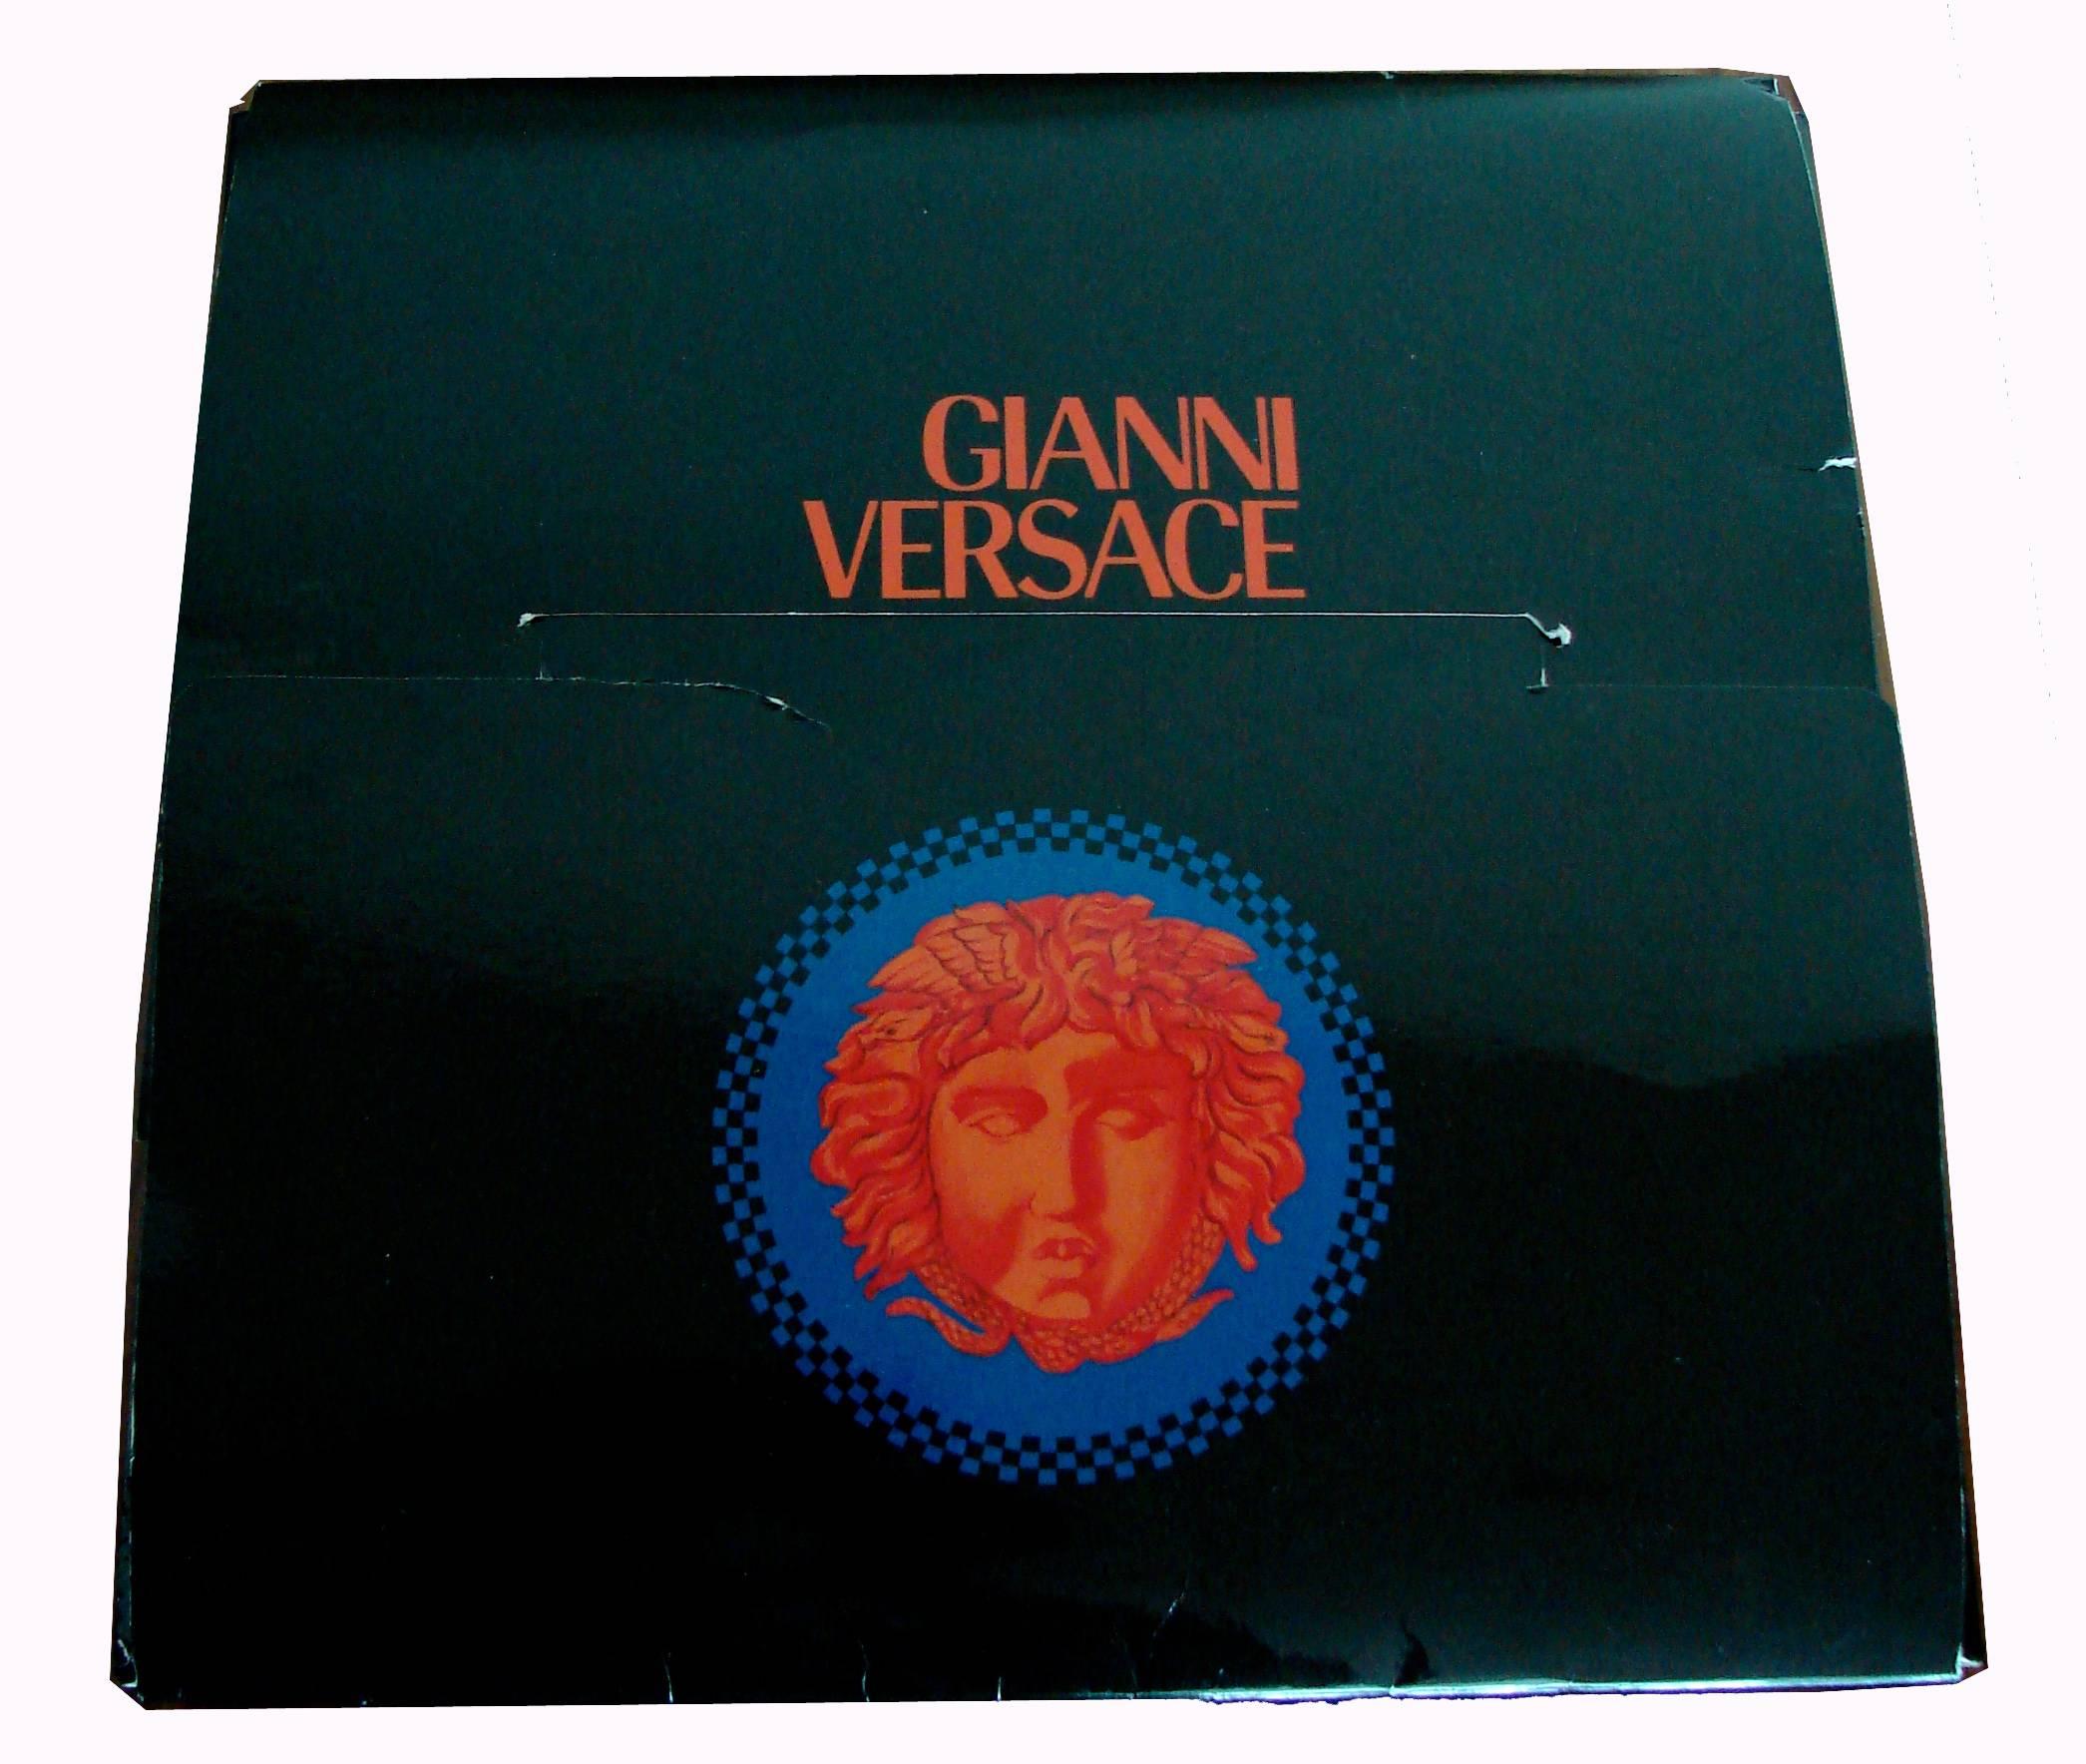 Iconic Gianni Versace Vogue Covers Large Silk Scarf Shawl 52in in Box 1990 5